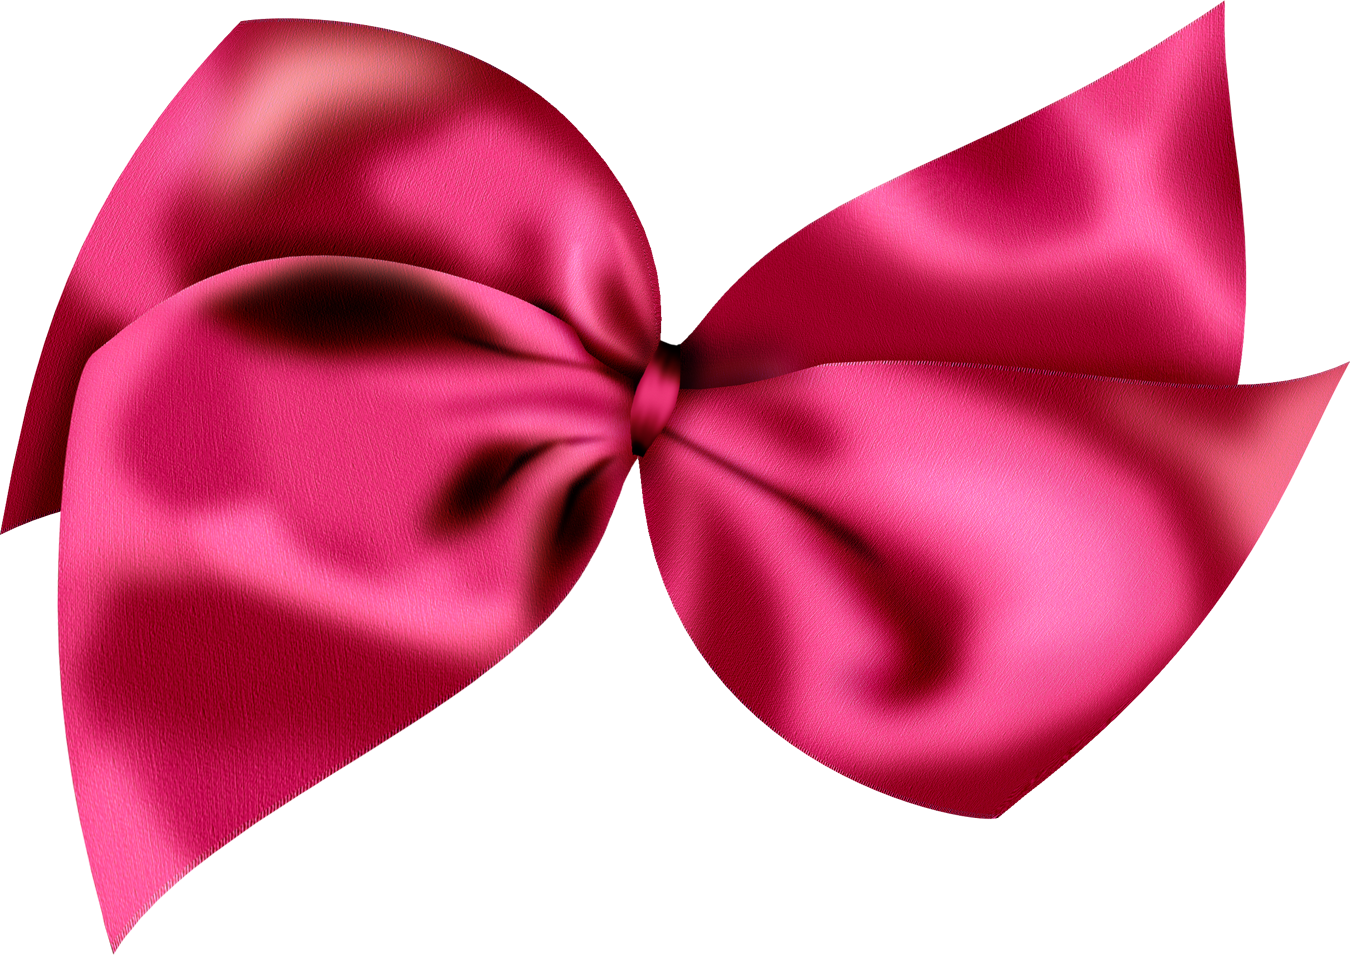 A Pink Bow On A Black Background